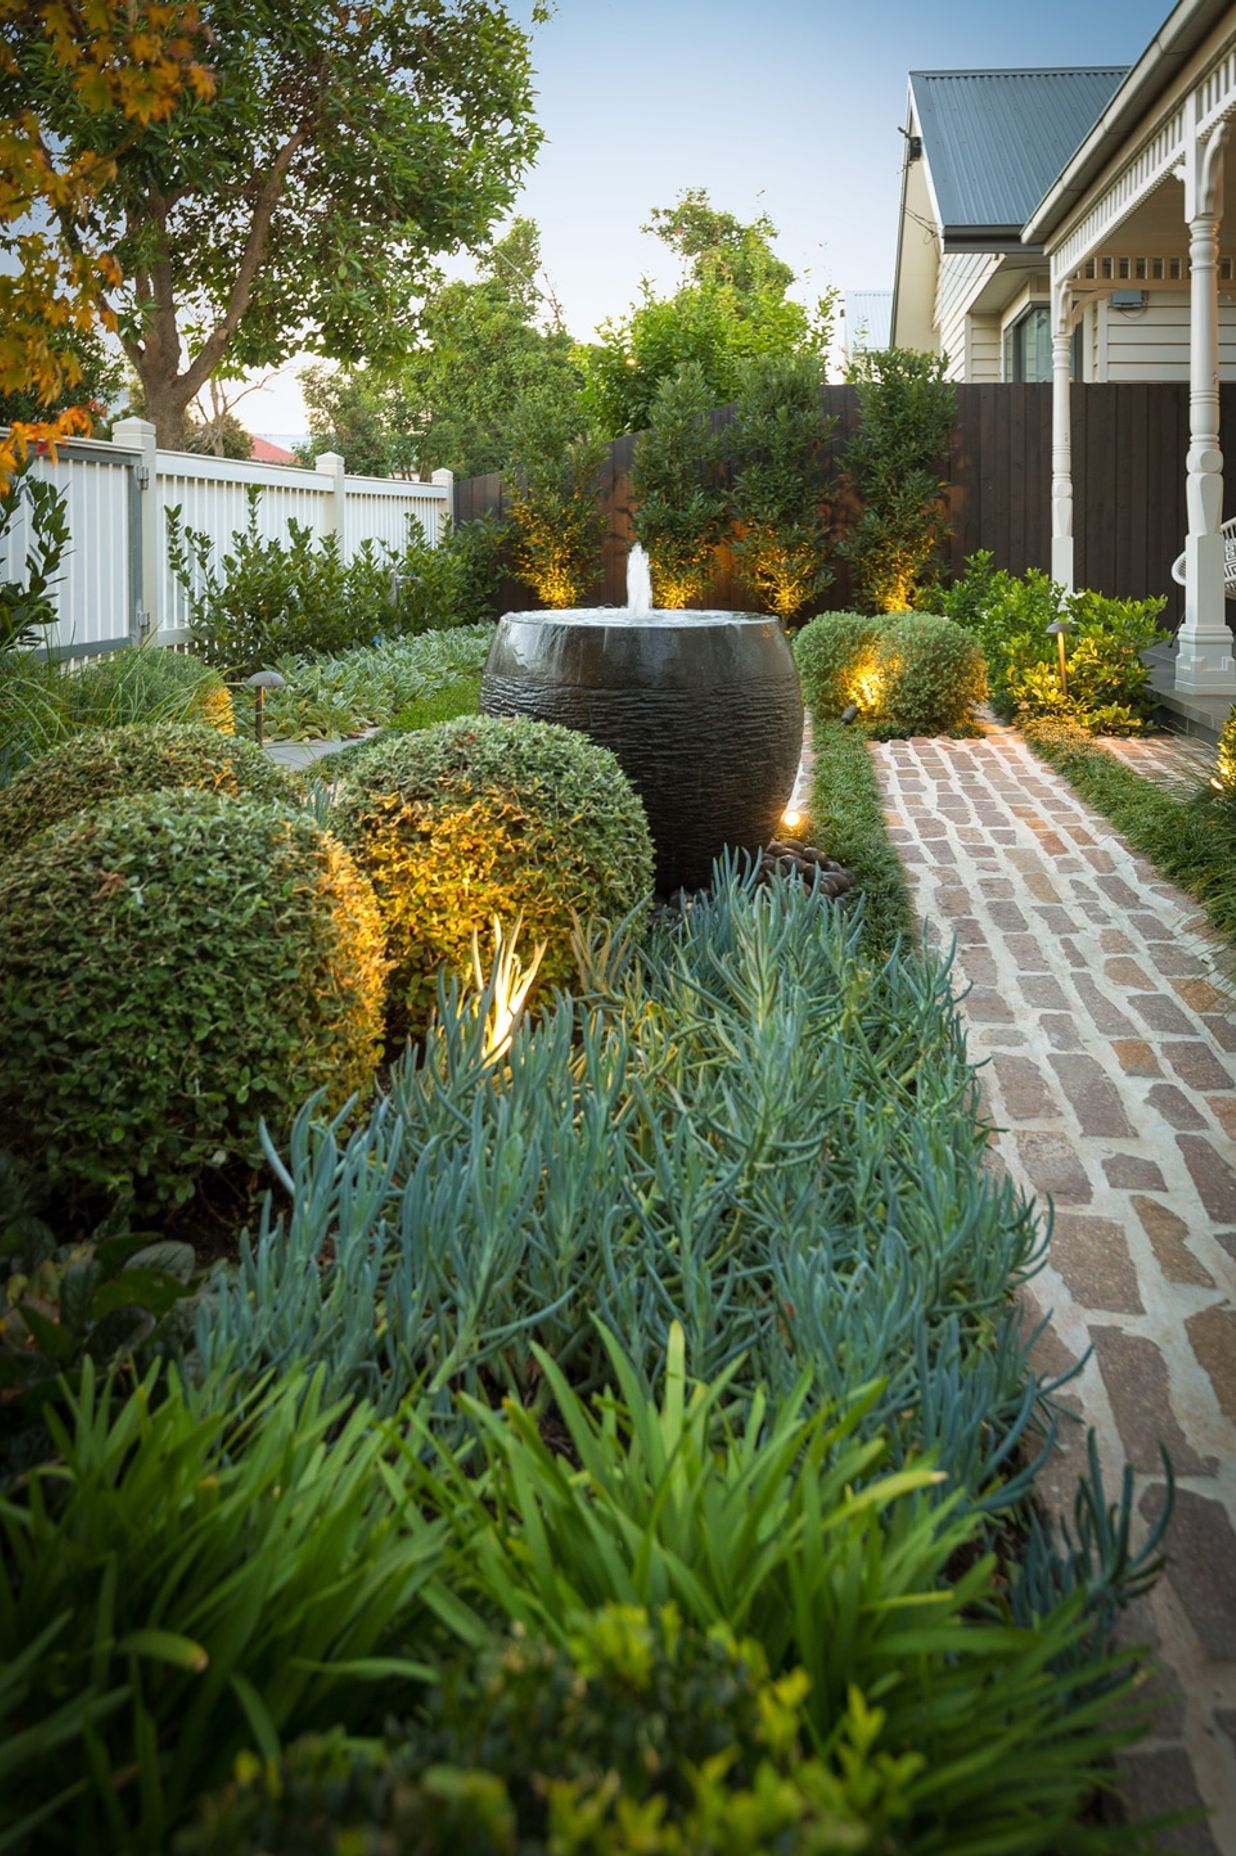 Gold Medal at the Landscaping Victoria Awards